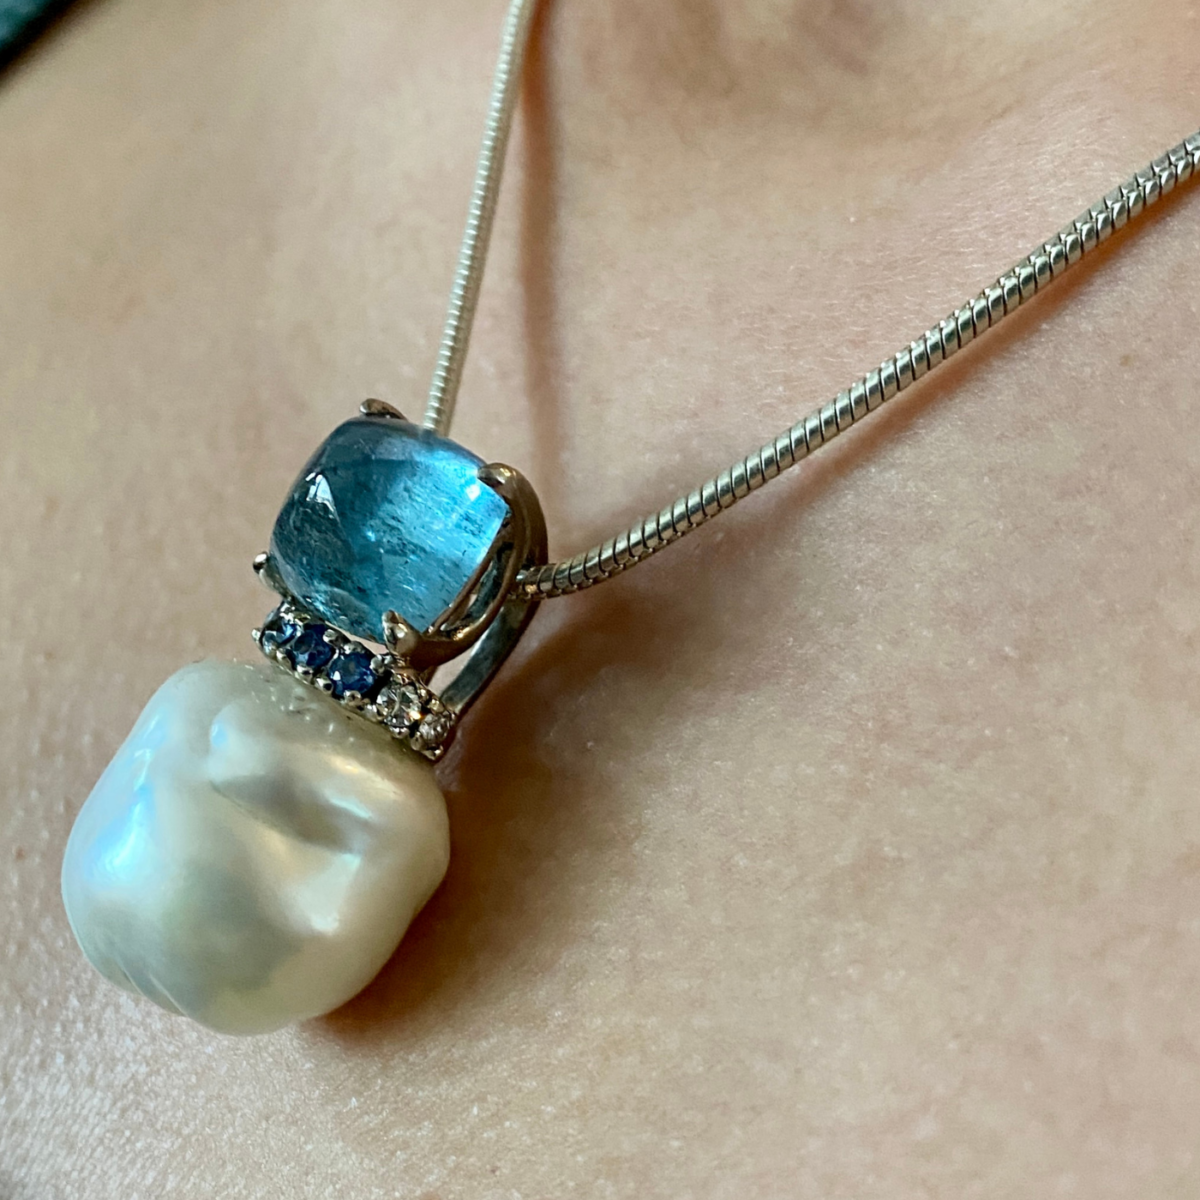 "Mermaid's Treasure" ~ Cynthia Renee Bespoke Pendant in 18 karat white gold featuring 20x21 mm Baroque Pearl, 9.31 carat Aquamarine sugarloaf cabochon, and Blue Sapphire and Diamond accent.